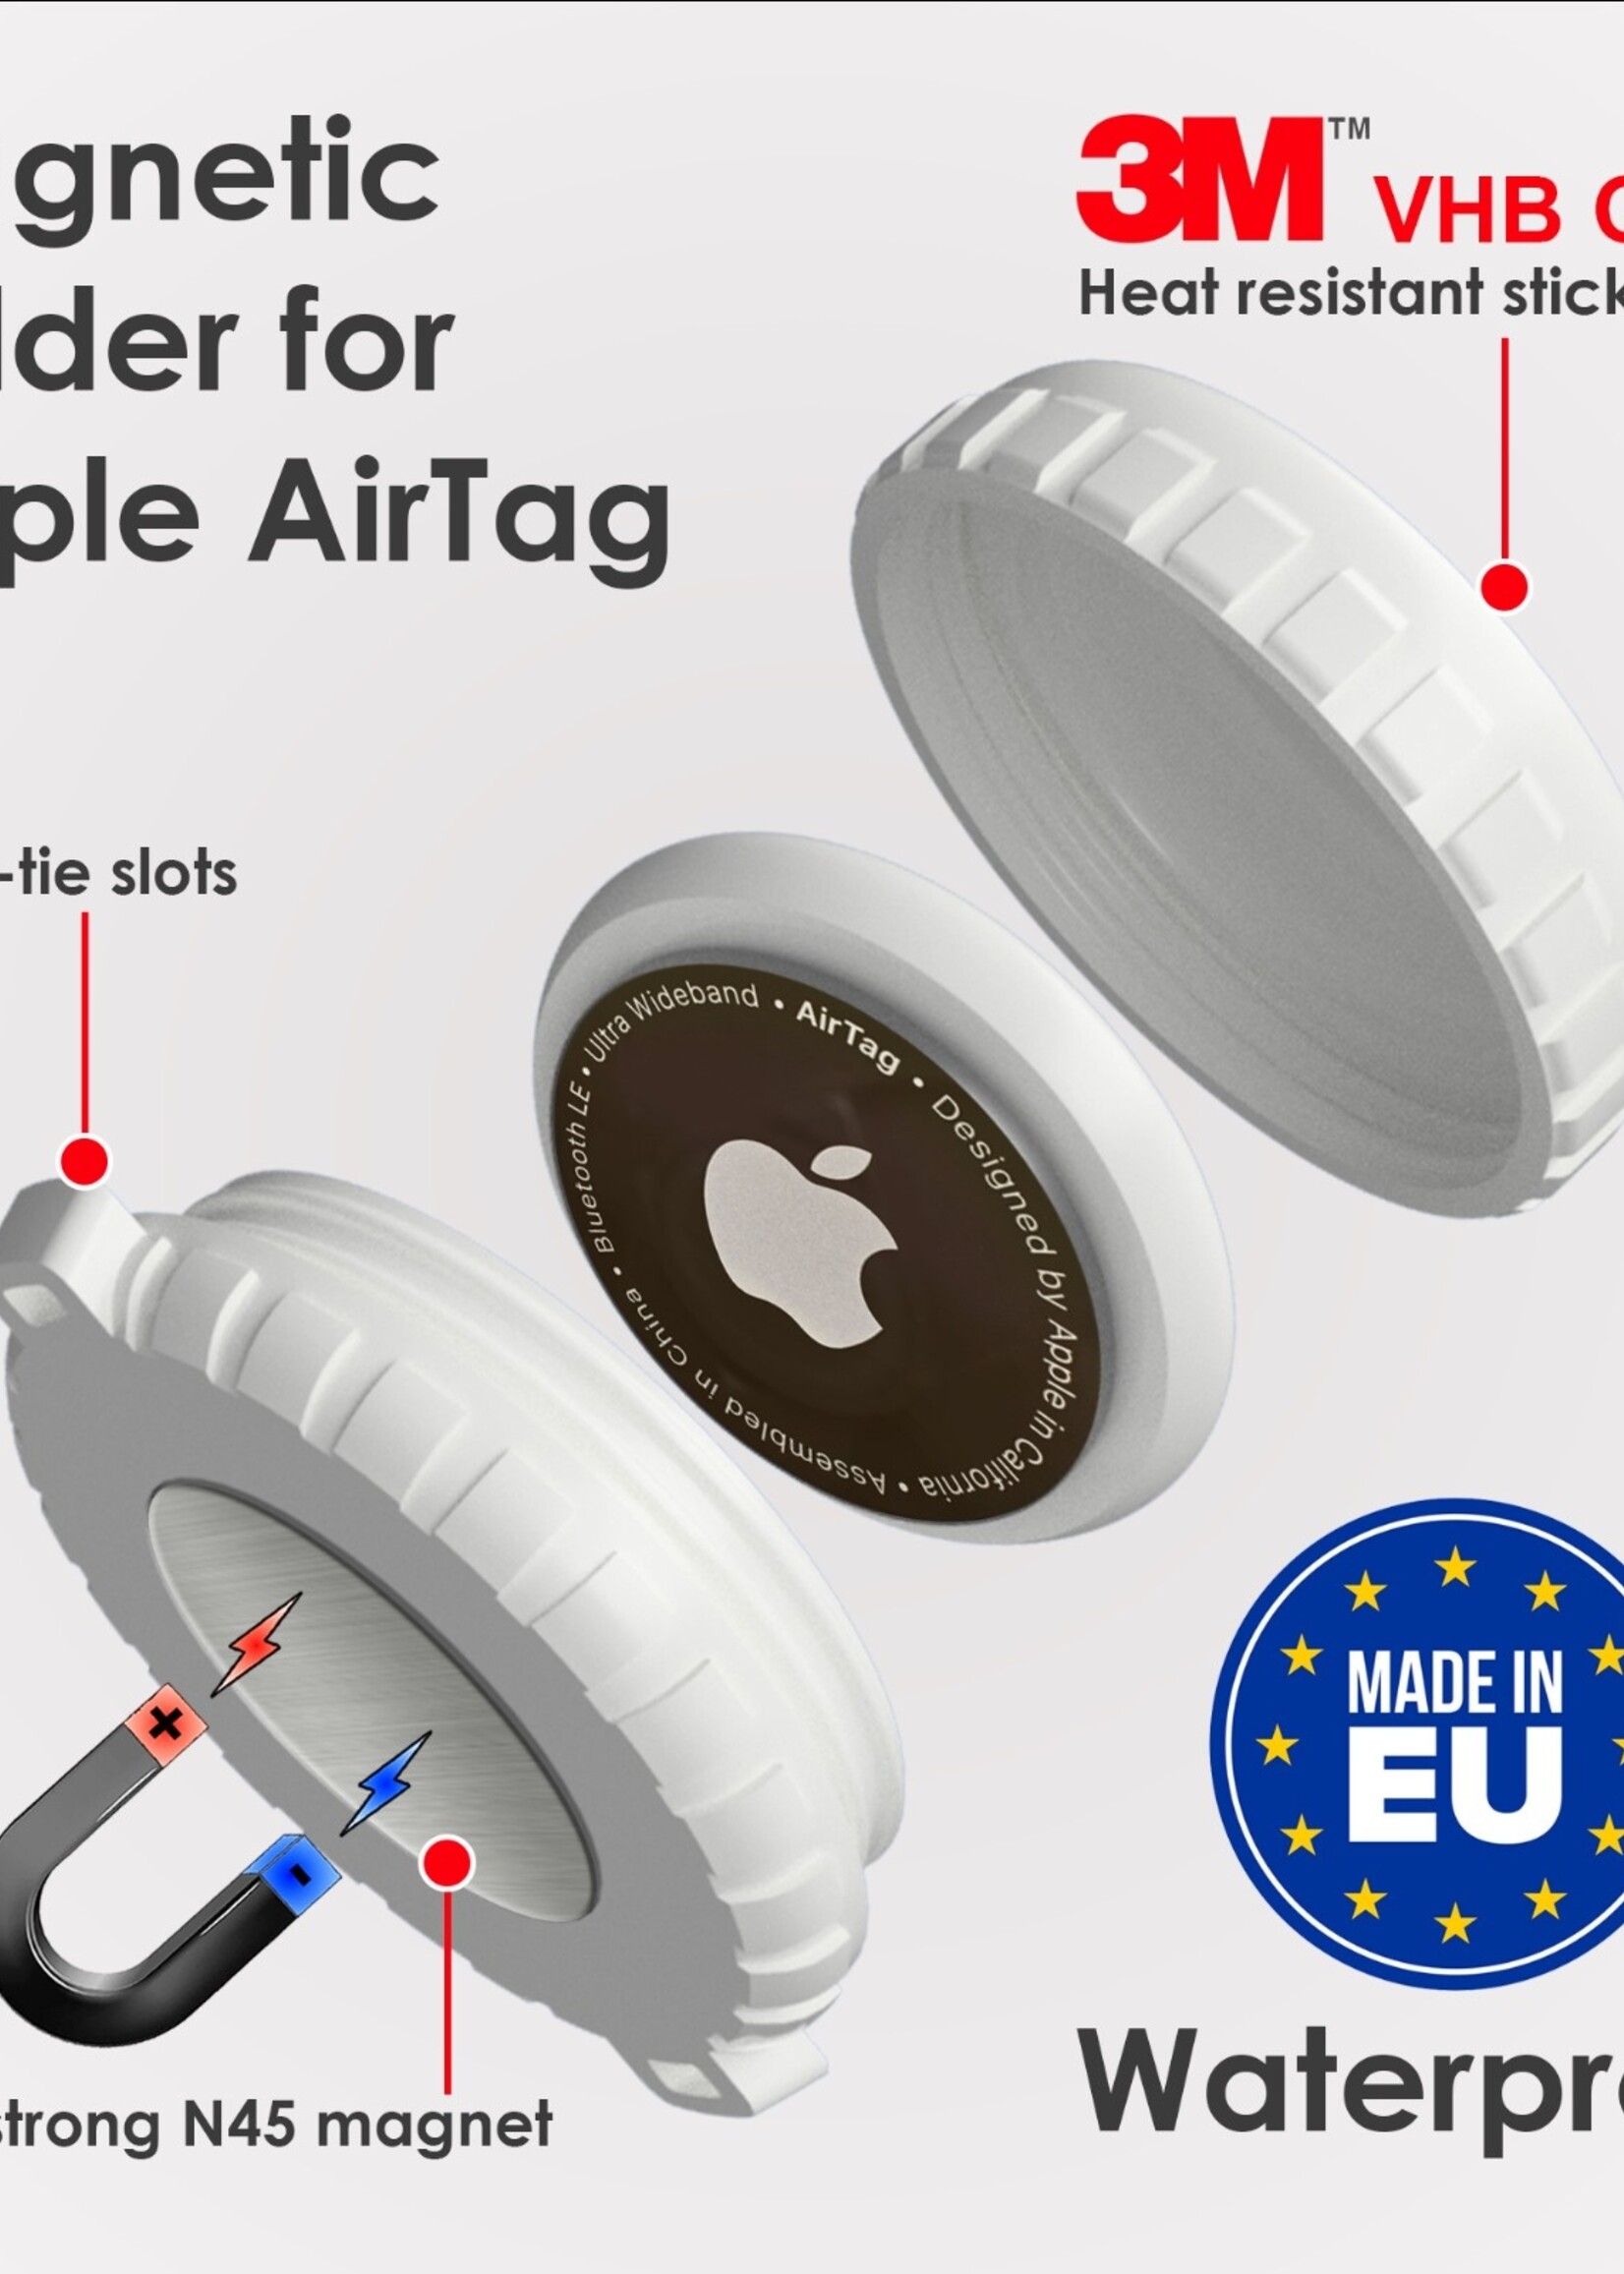 Bluemayim Made in EU  Magnetic Holder Waterproof for the  Apple Airtag with 3M Sticker (VHB)